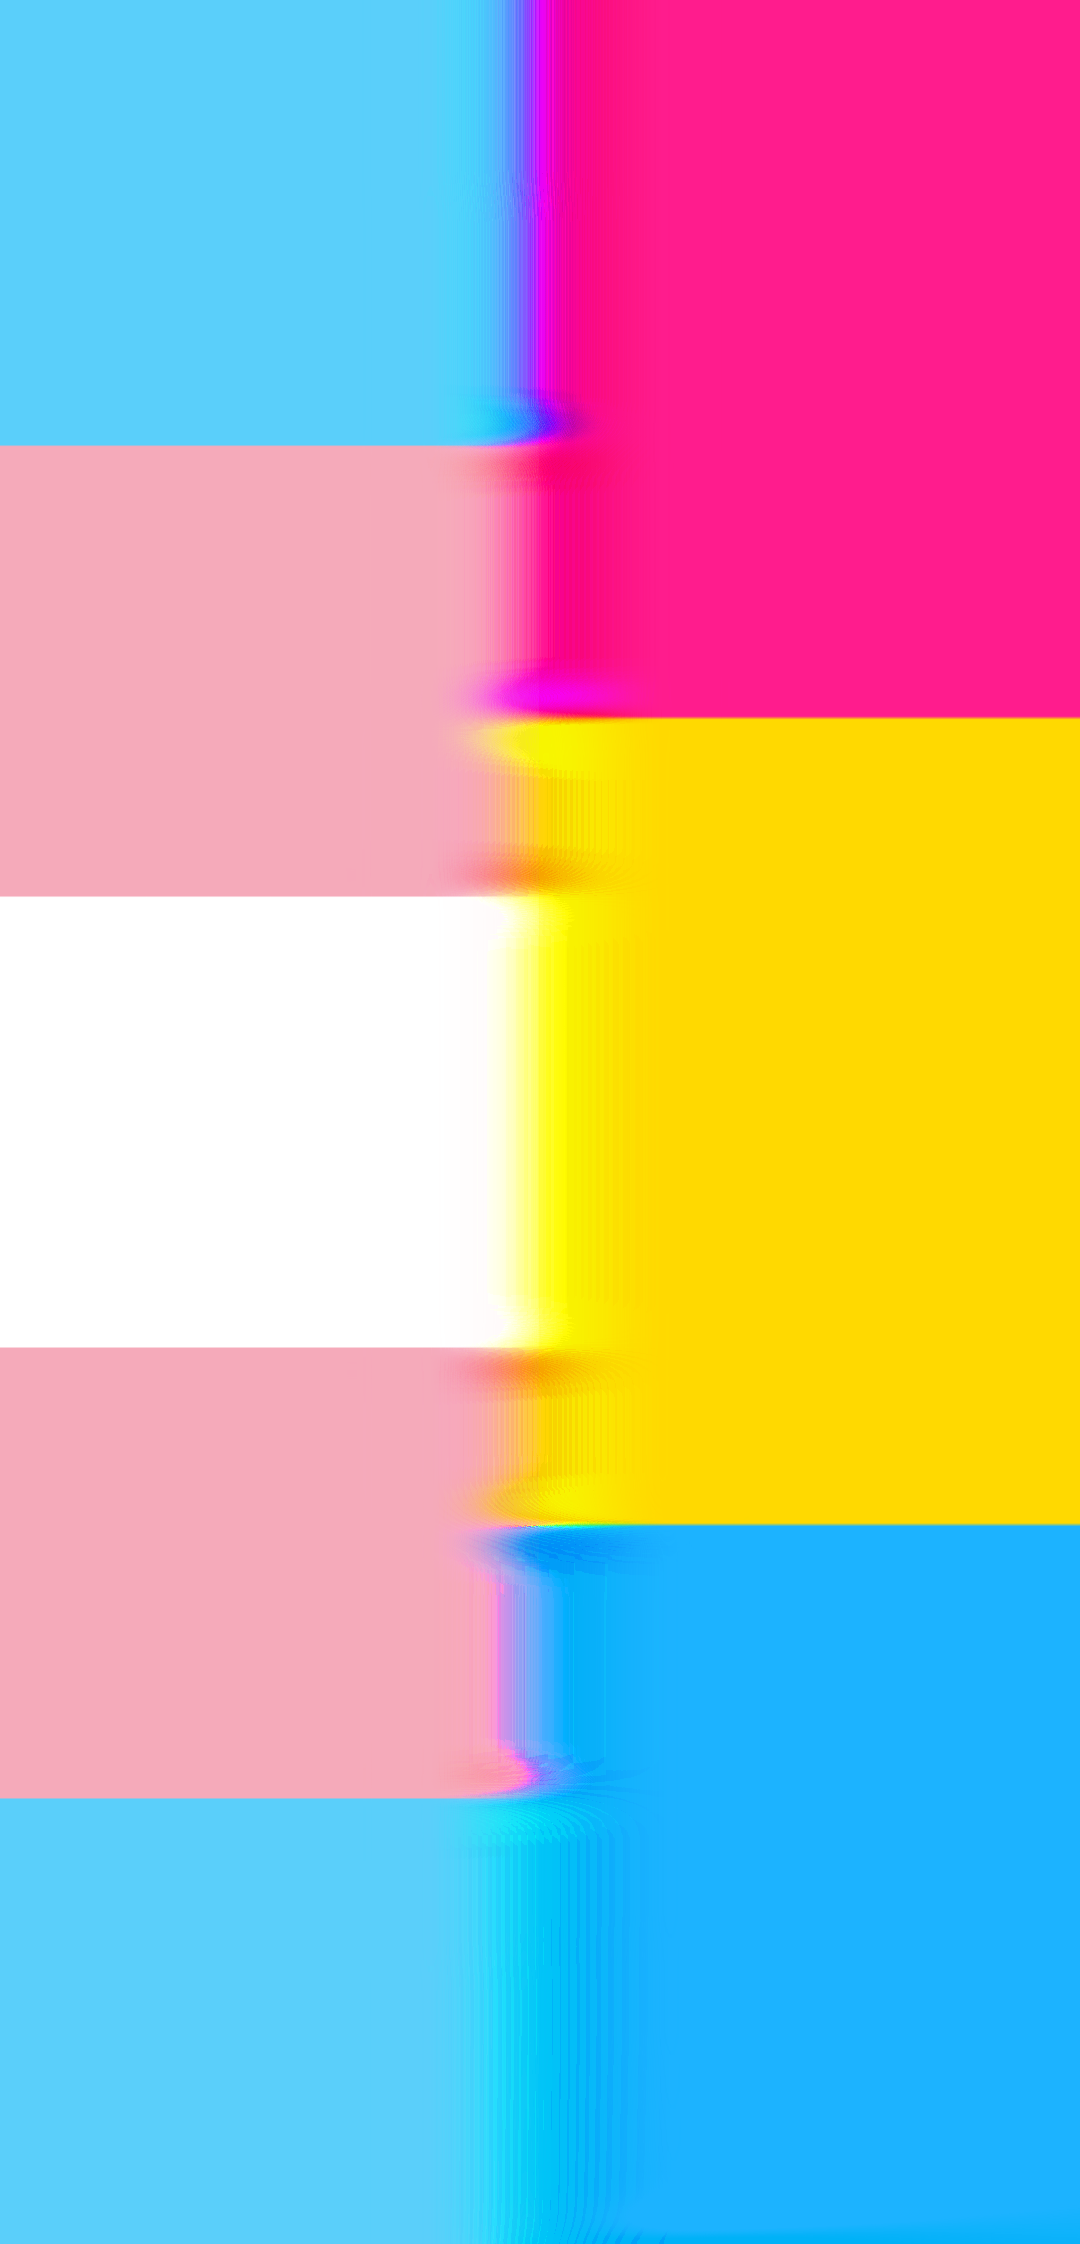 I Made A Transgender Pansexual Wallpaper If Anyone Wants To Use It <3: Lgbt